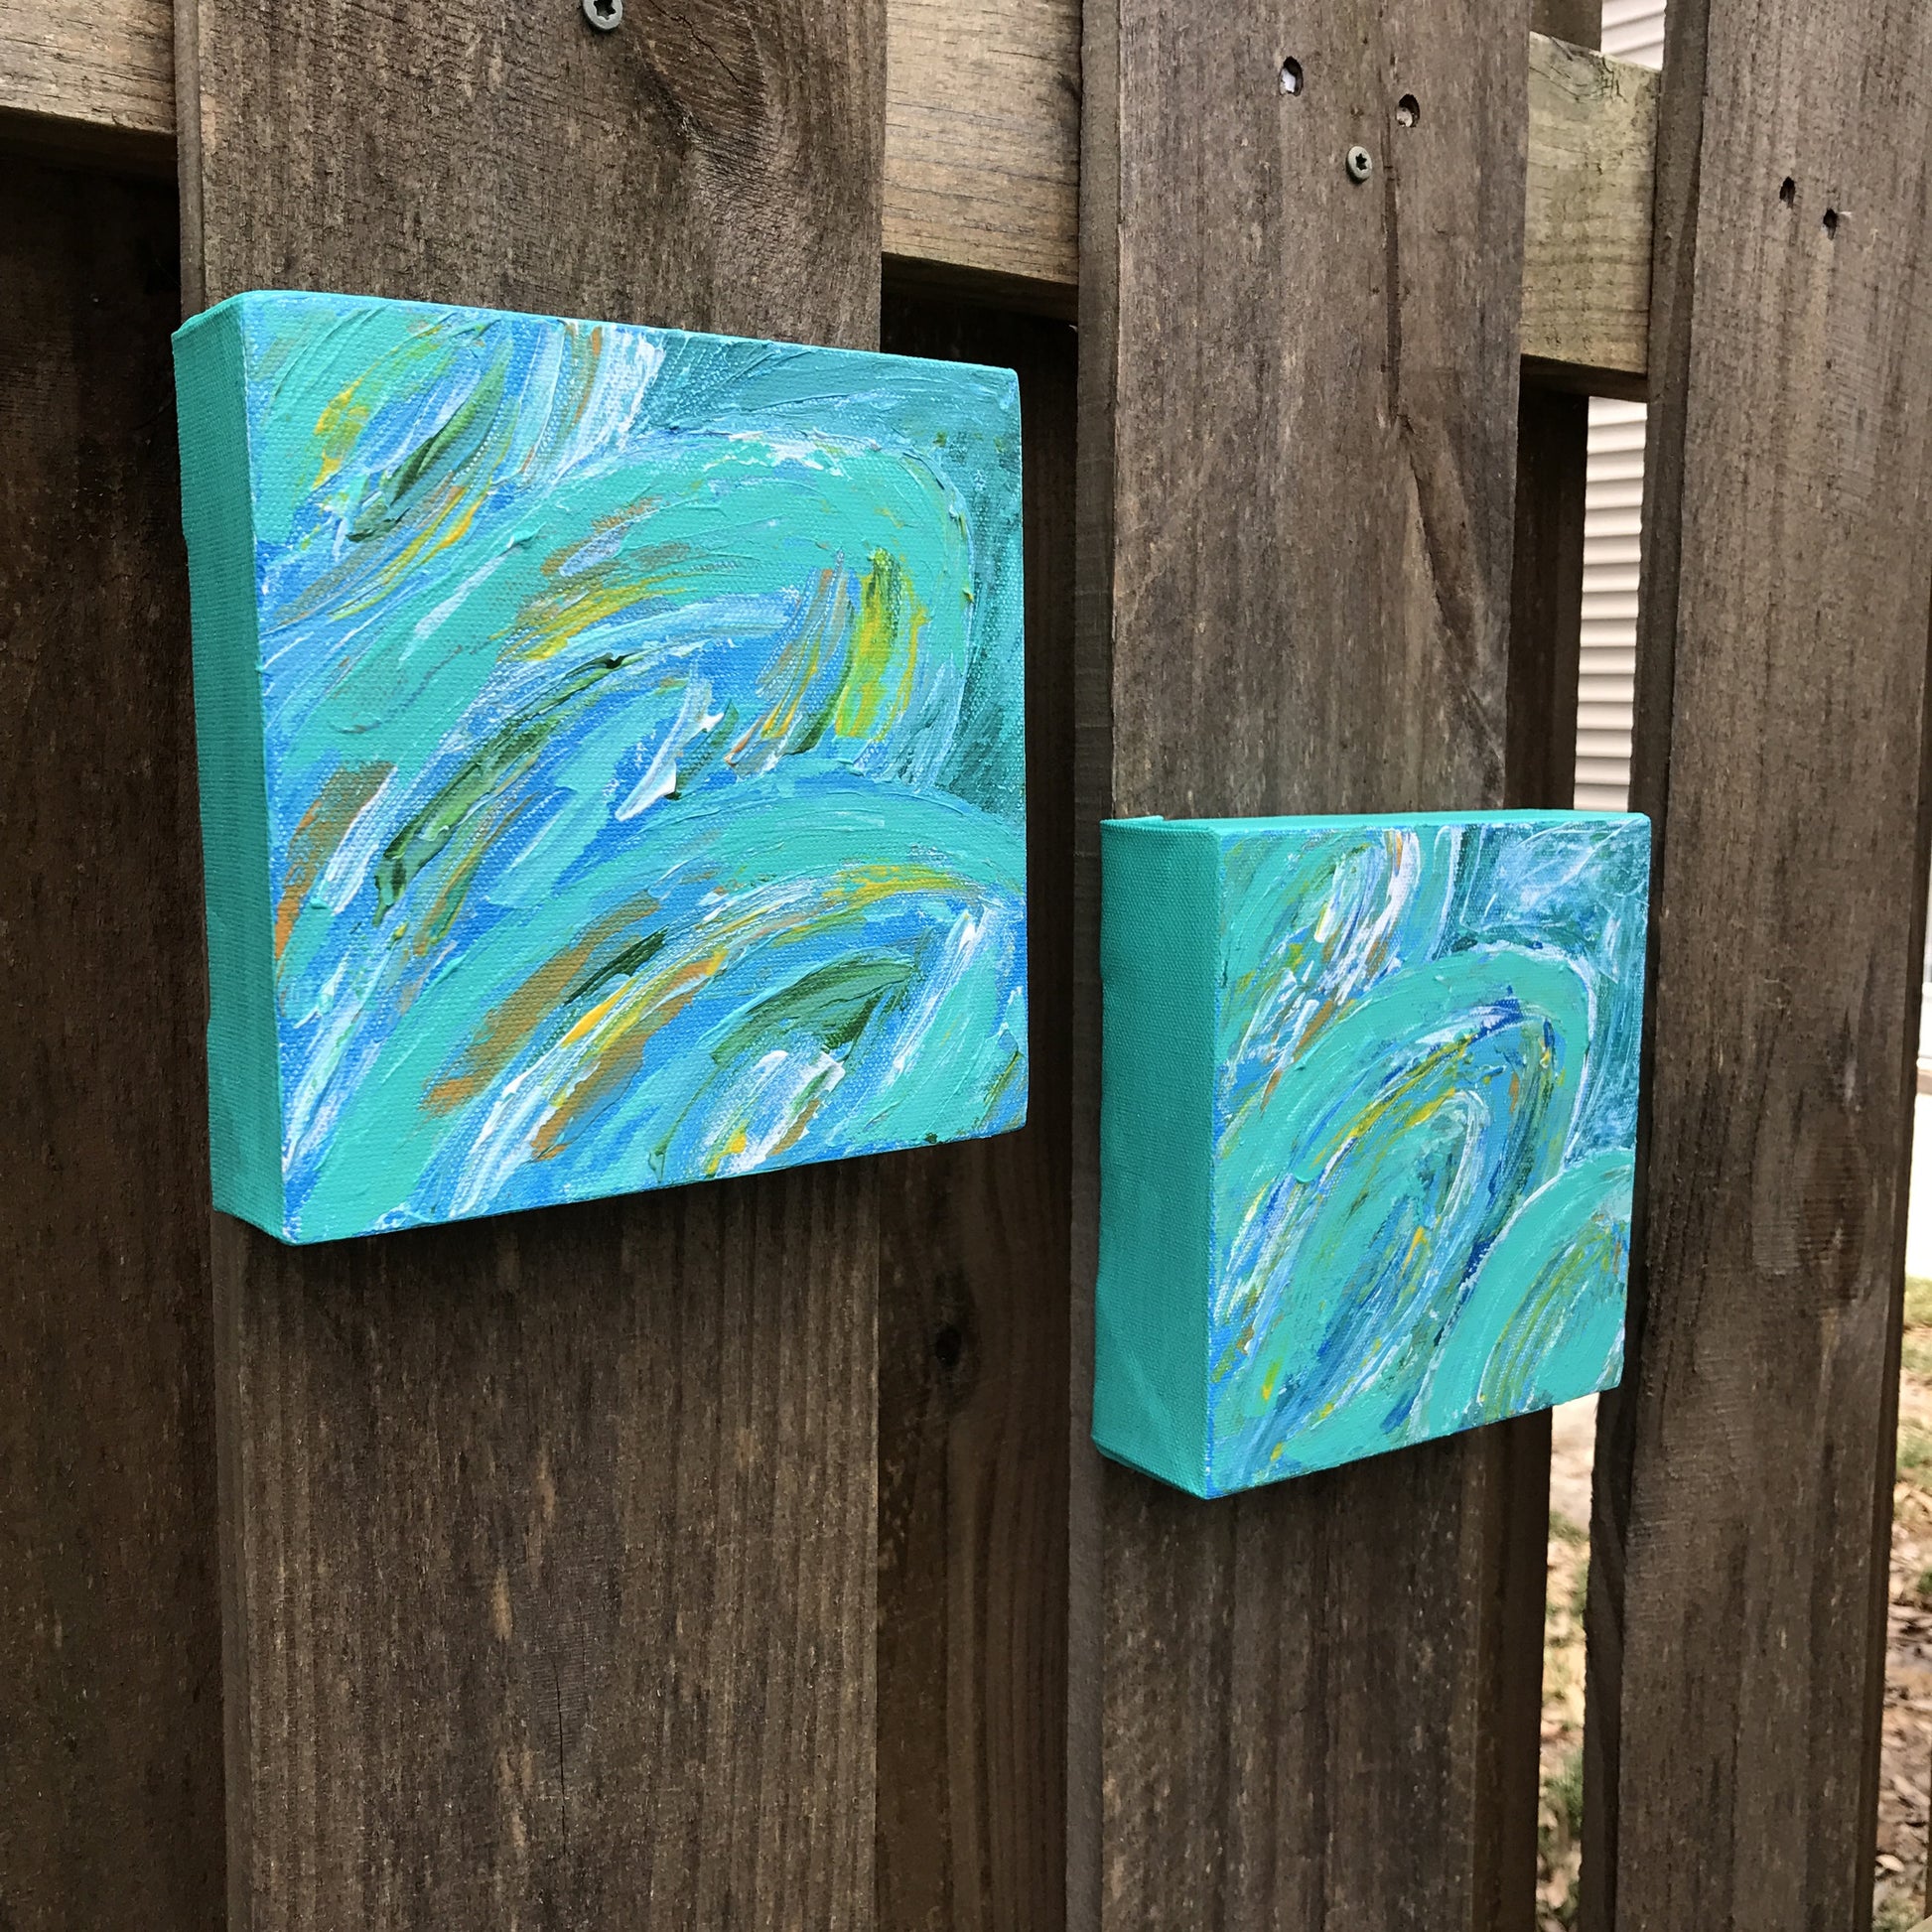 Tropical Leaves I & II, Acrylic Mini Painting by Andrea Smith